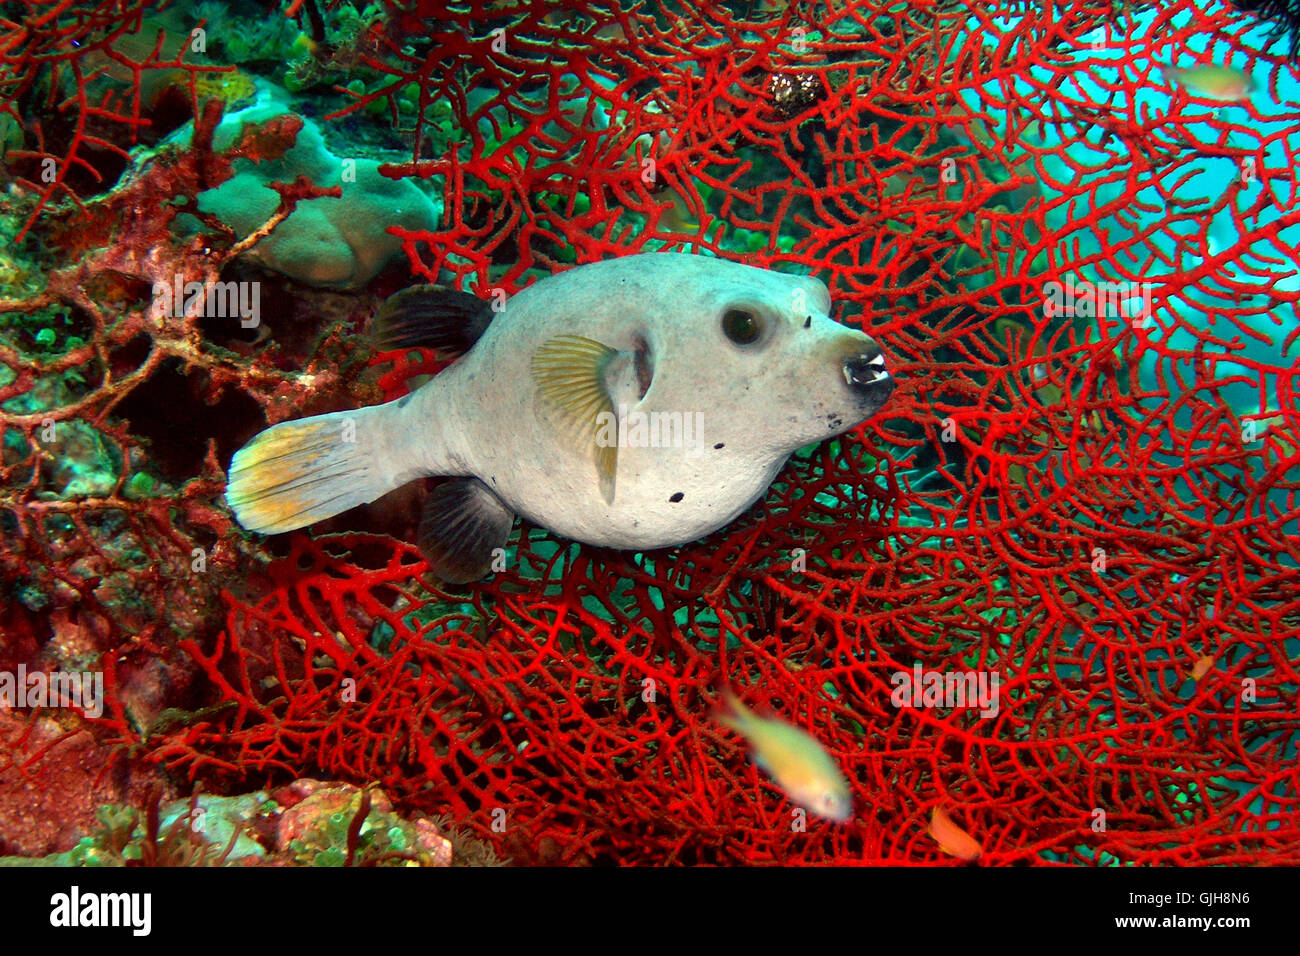 fan coral with ball fish Stock Photo